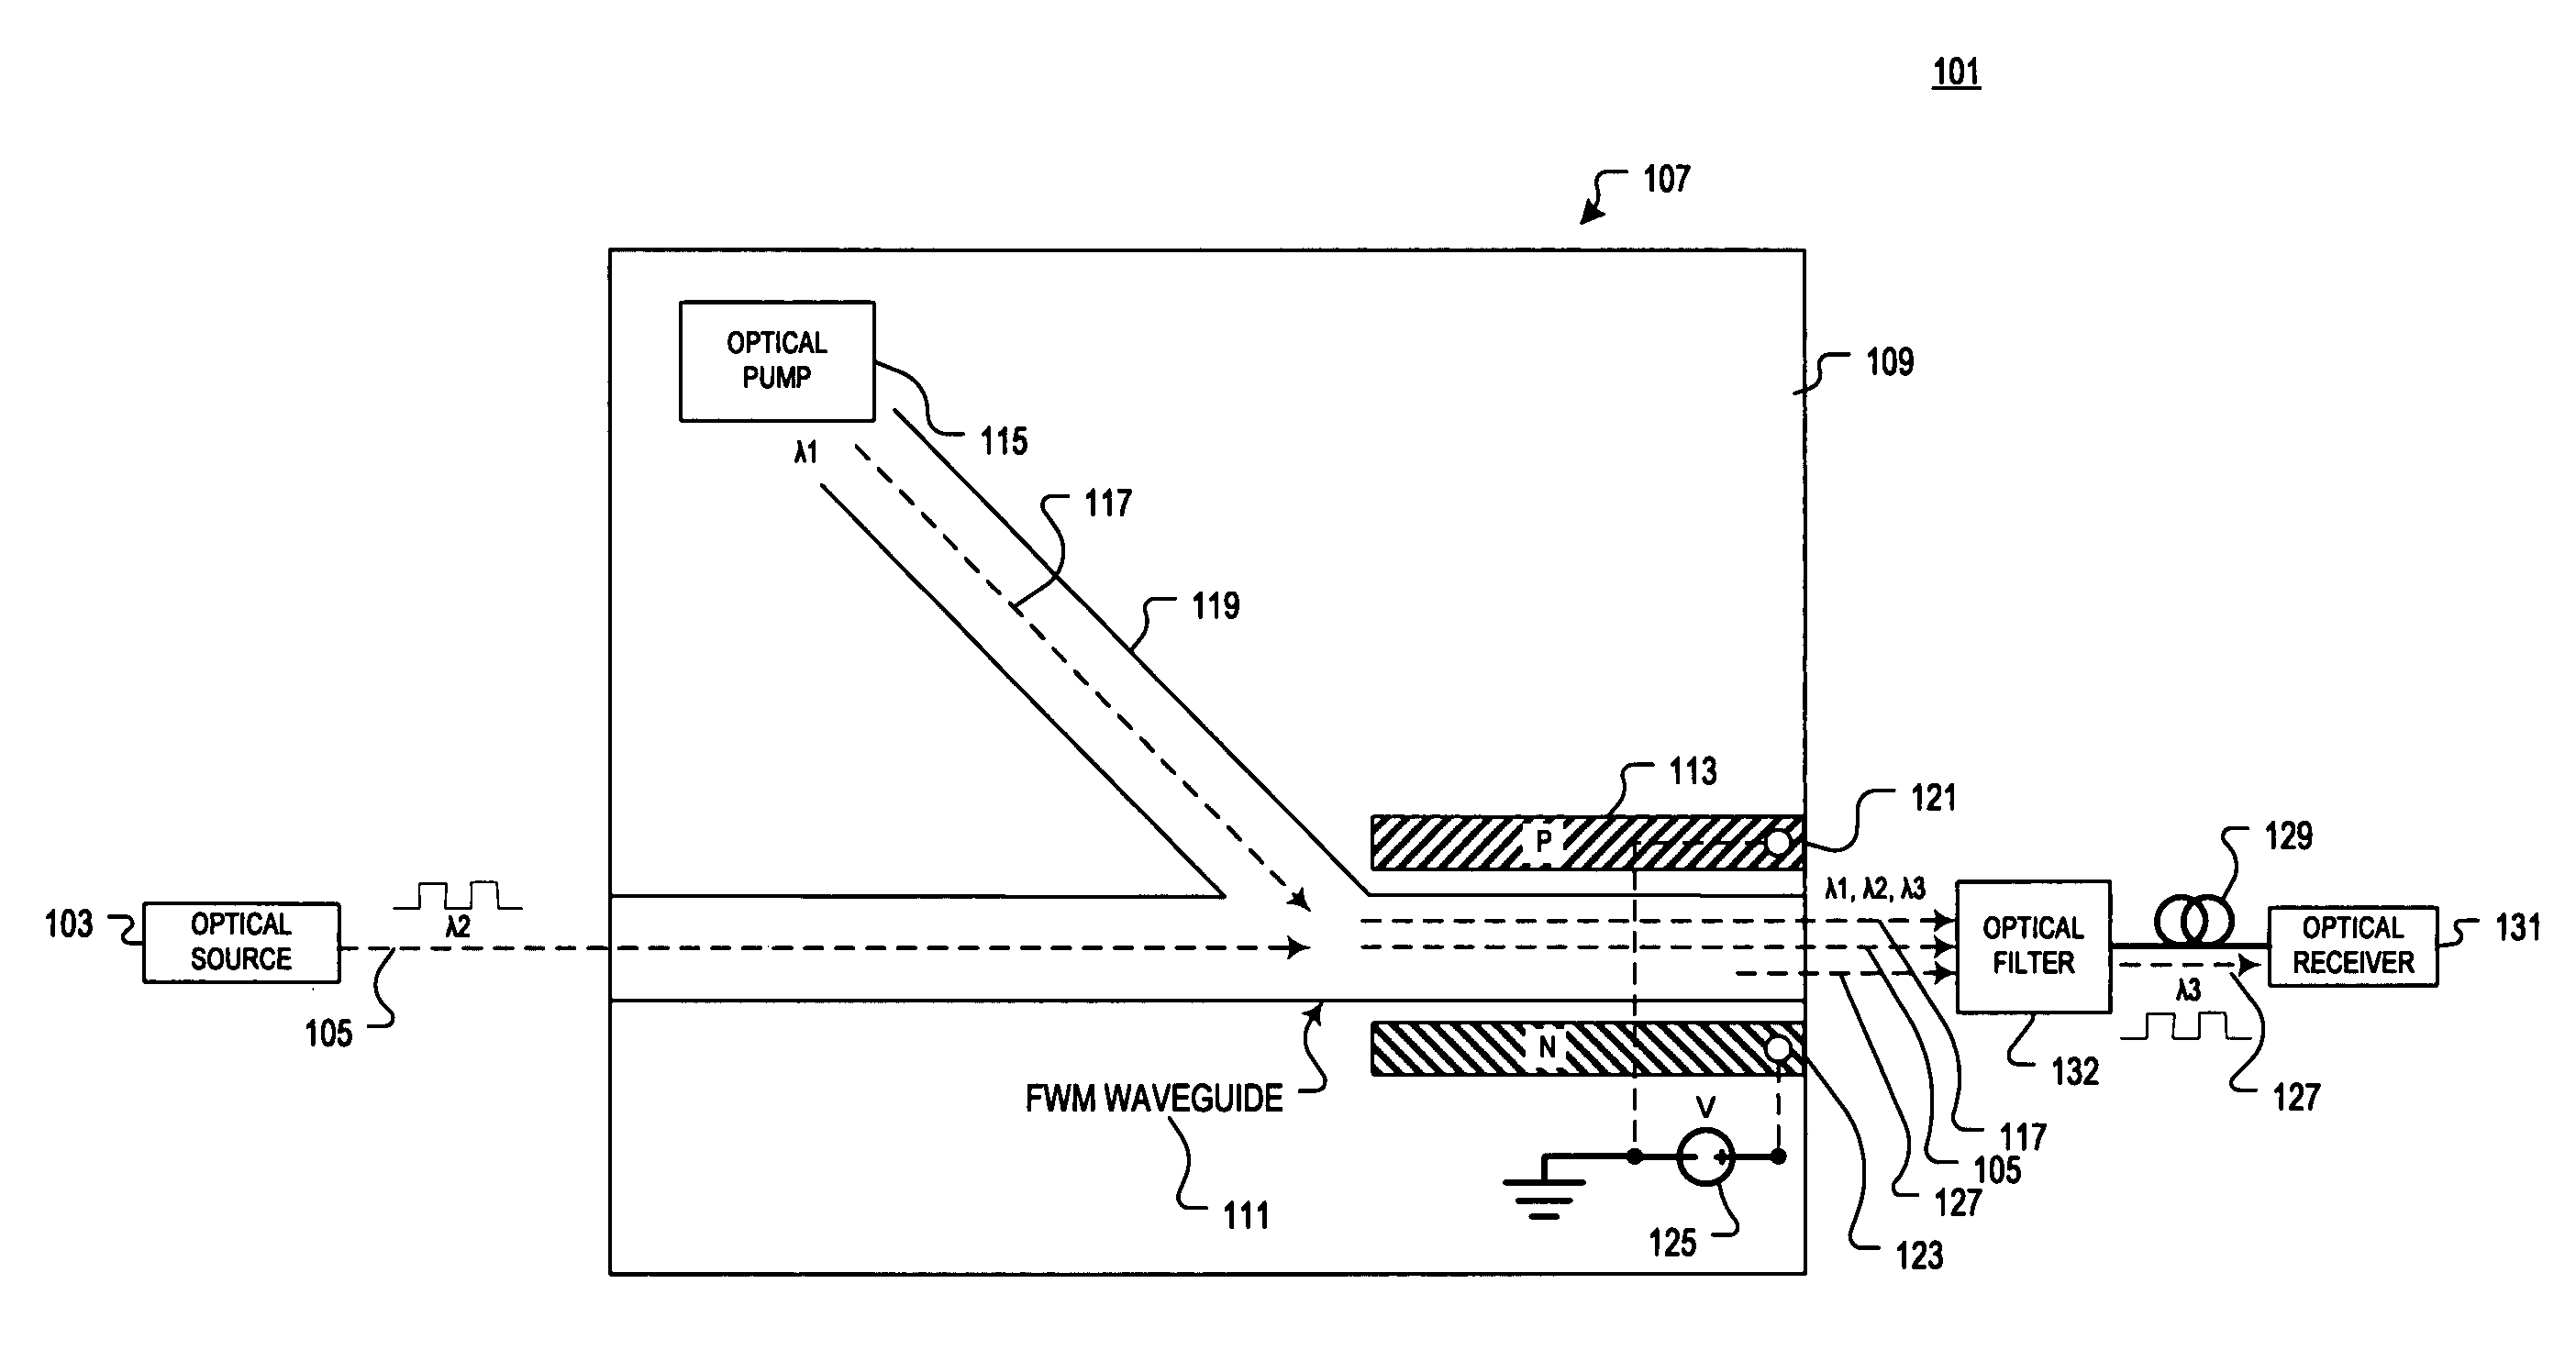 Semiconductor waveguide based high speed all optical wavelength converter